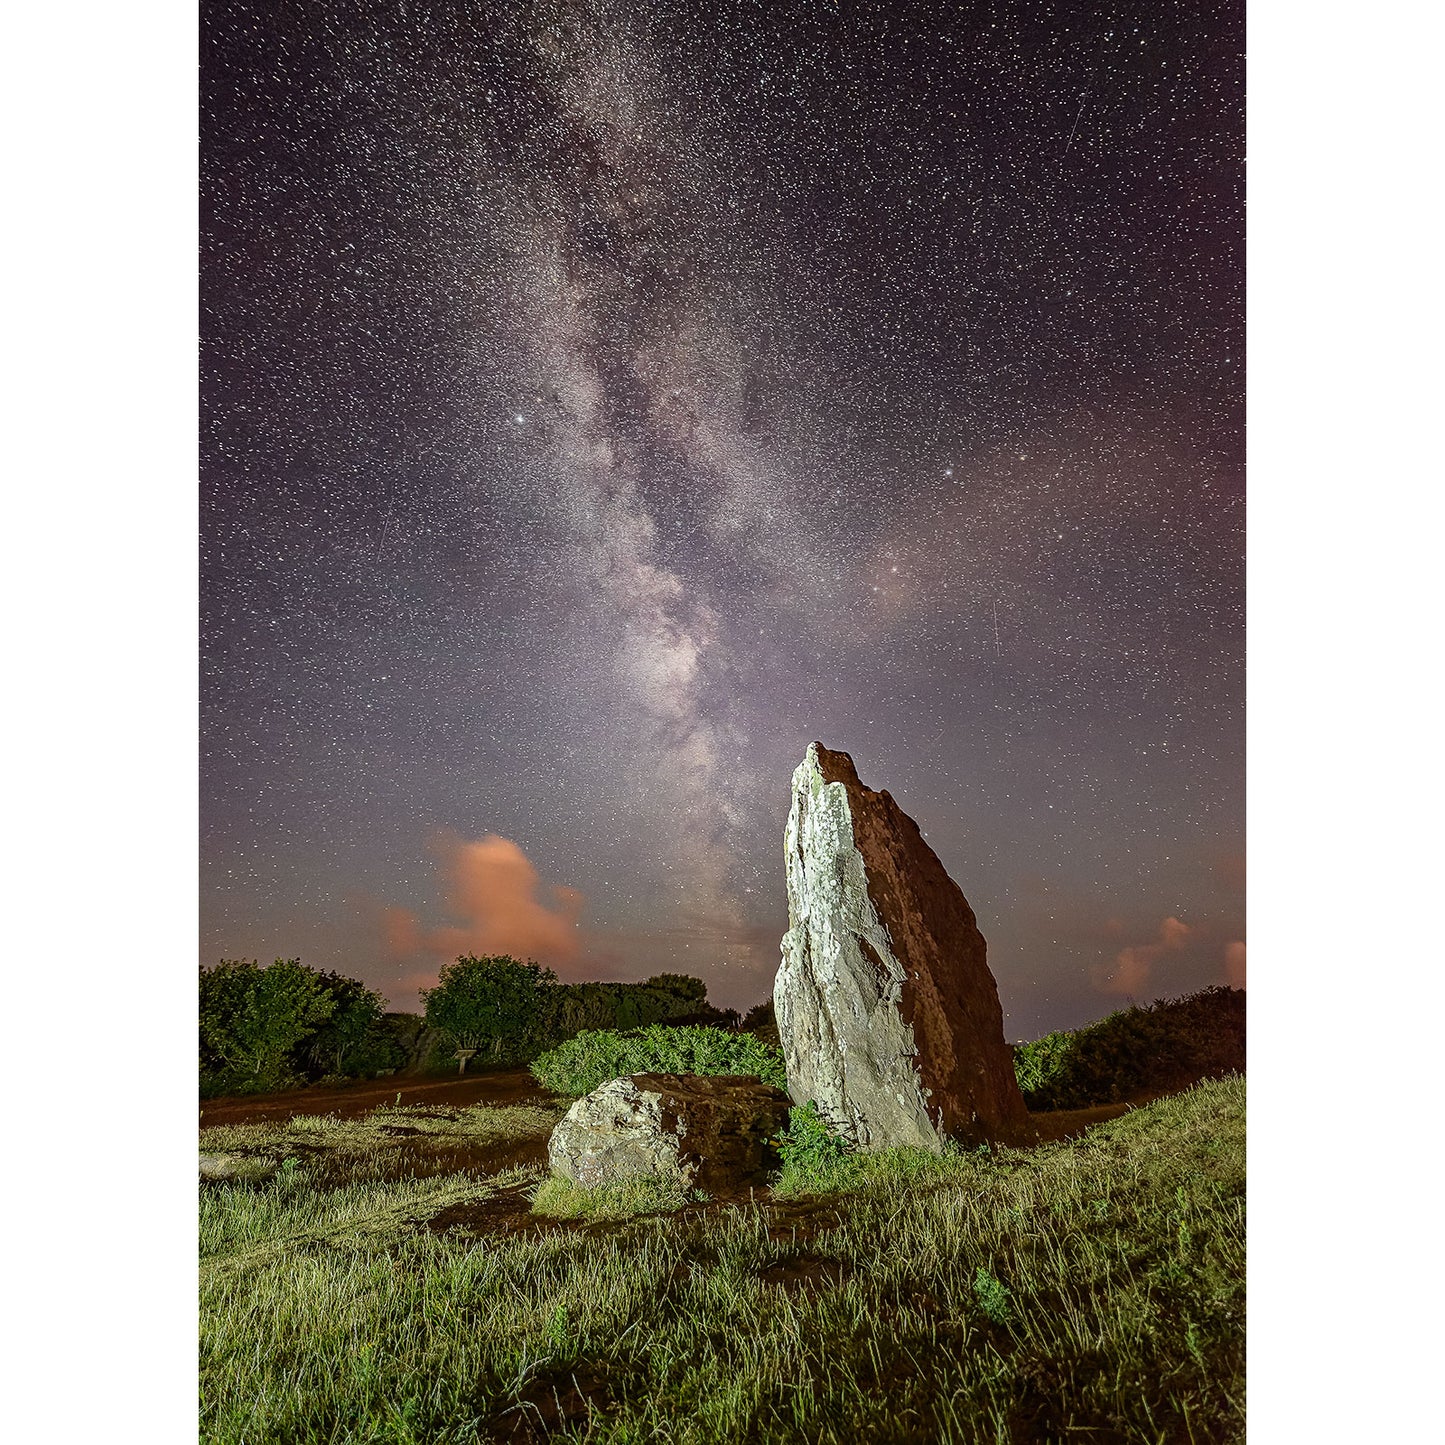 A standing stone on the Isle of Wight under a starry night sky with the Milky Way visible, captured by Available Light Photography's The Longstone.